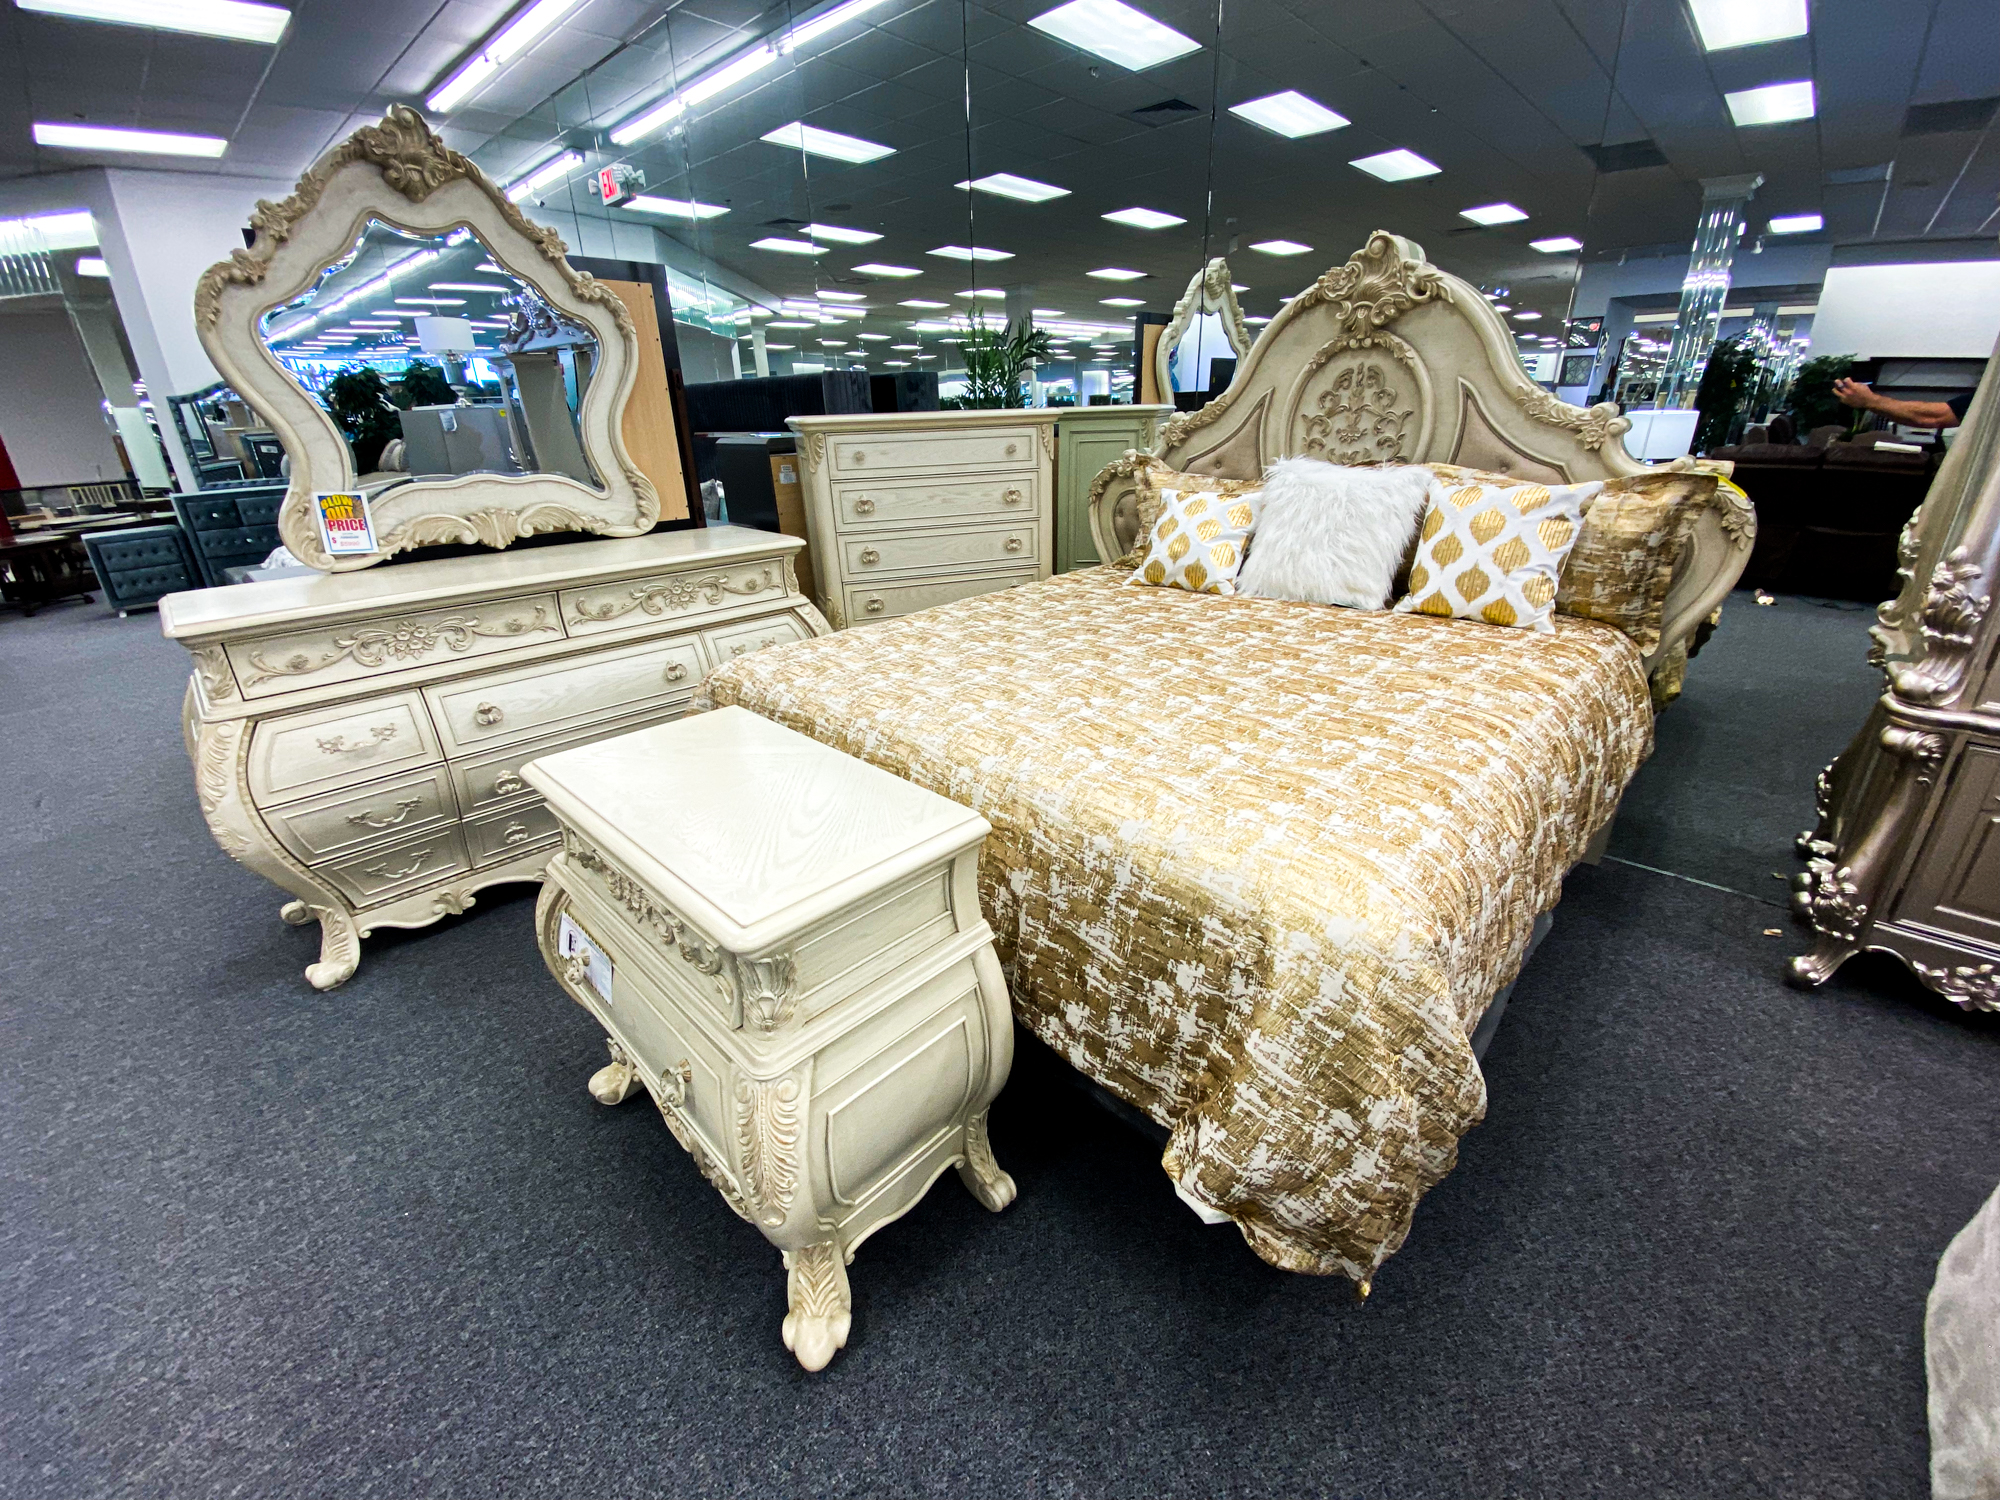 Furniture store in katy